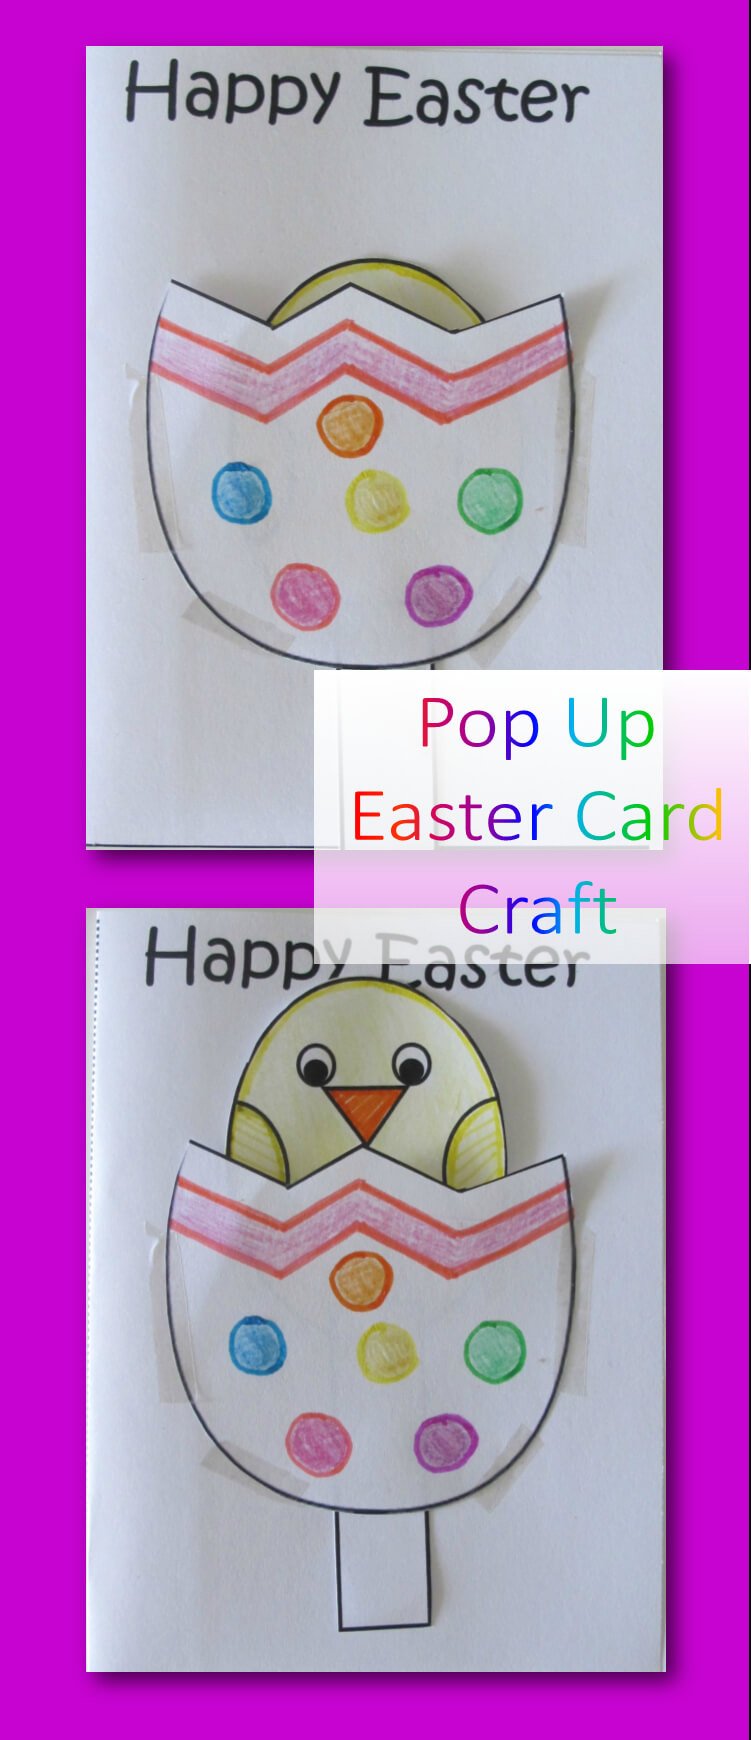 Pop Up Easter Cards Are So Cute And Really Easy To Make With With Easter Card Template Ks2